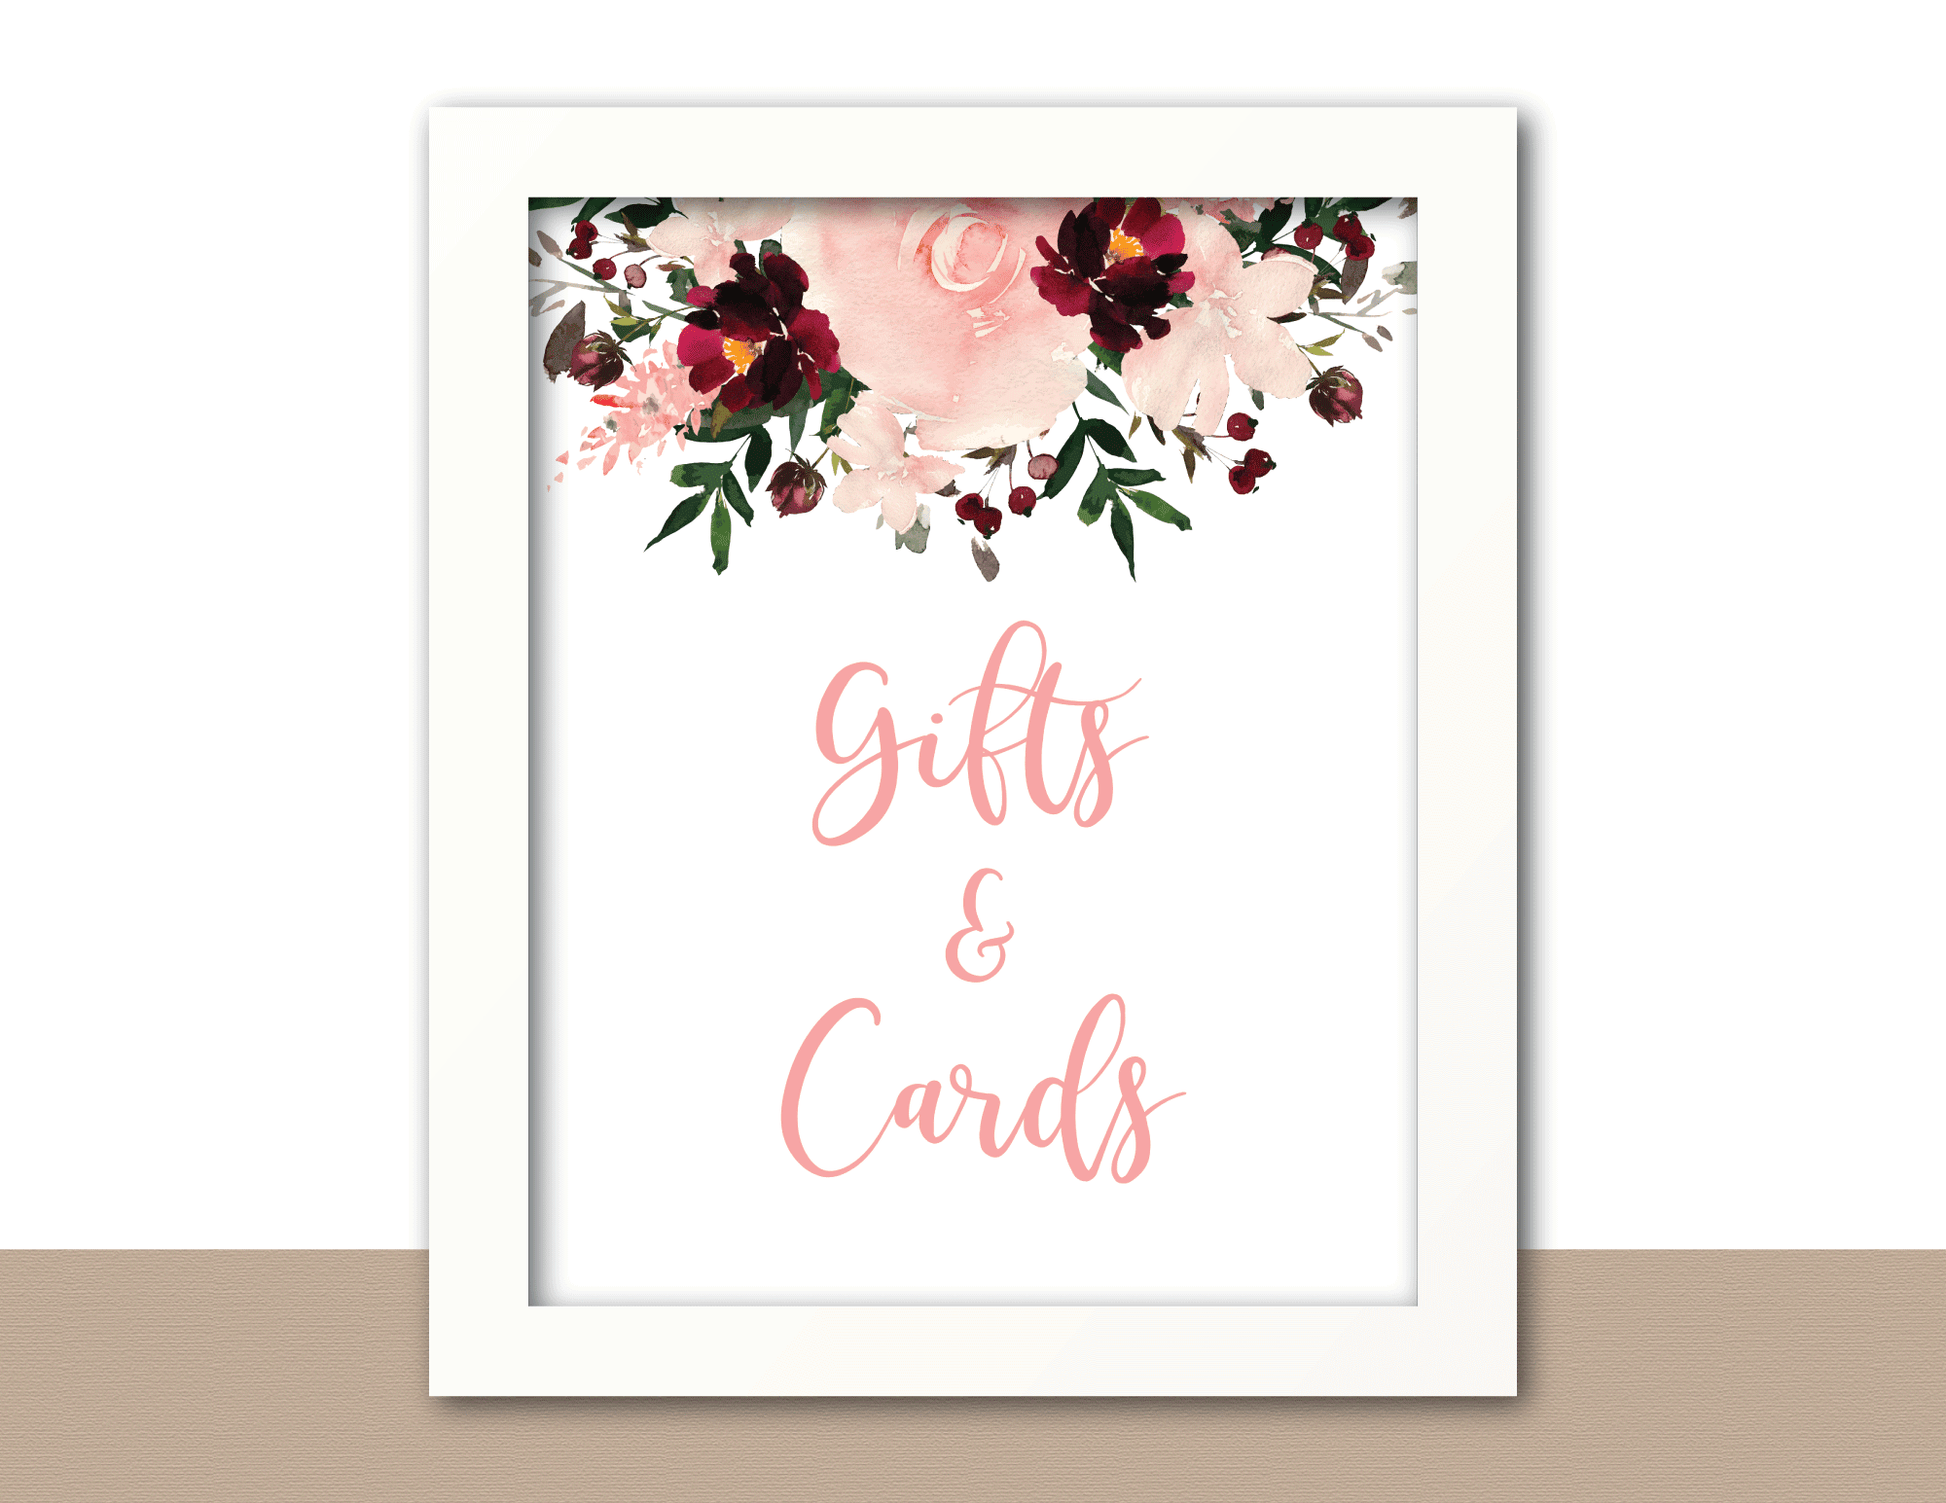 gifts and cards printable sign -diy baby shower decor - Celebrating Together